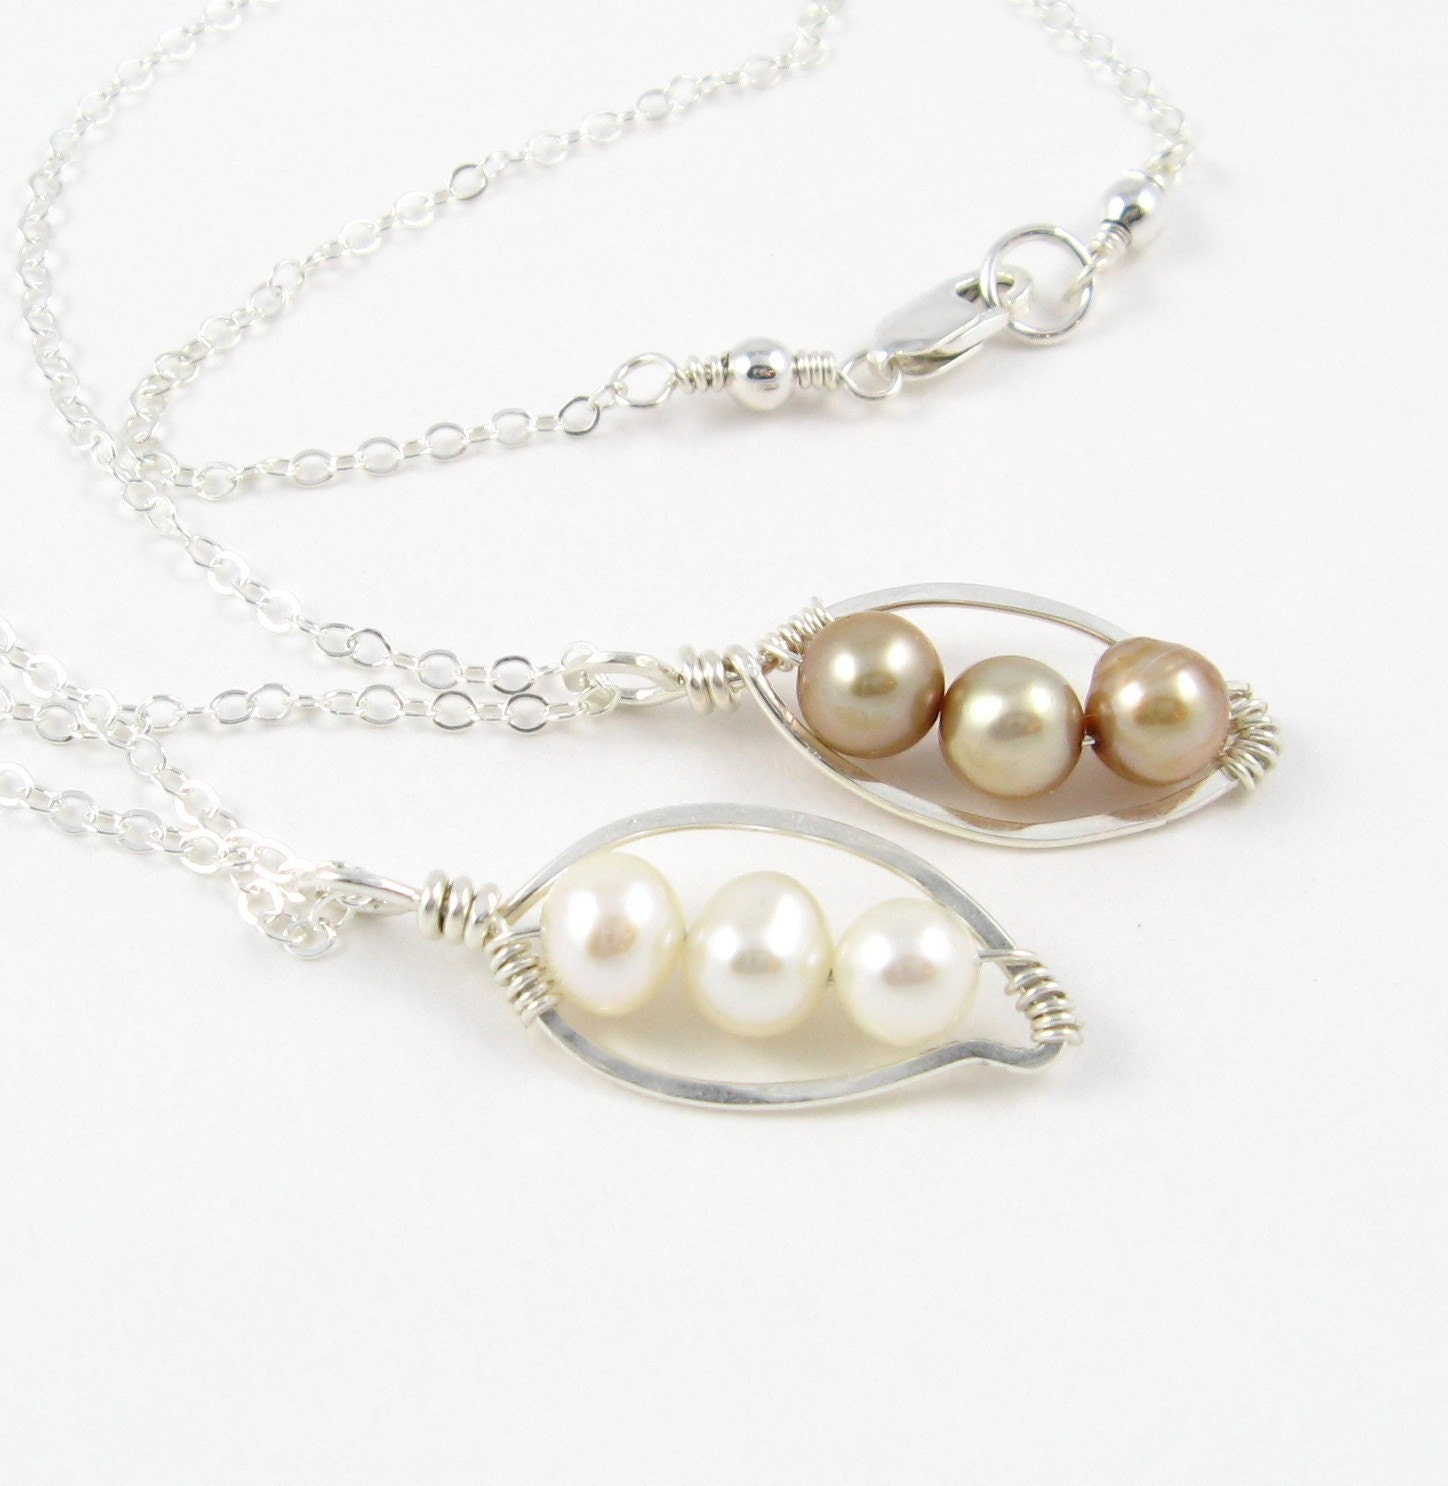   Necklace on Pea Pod Peapod Mother S Necklace Pearl Freshwater Sterling Silver